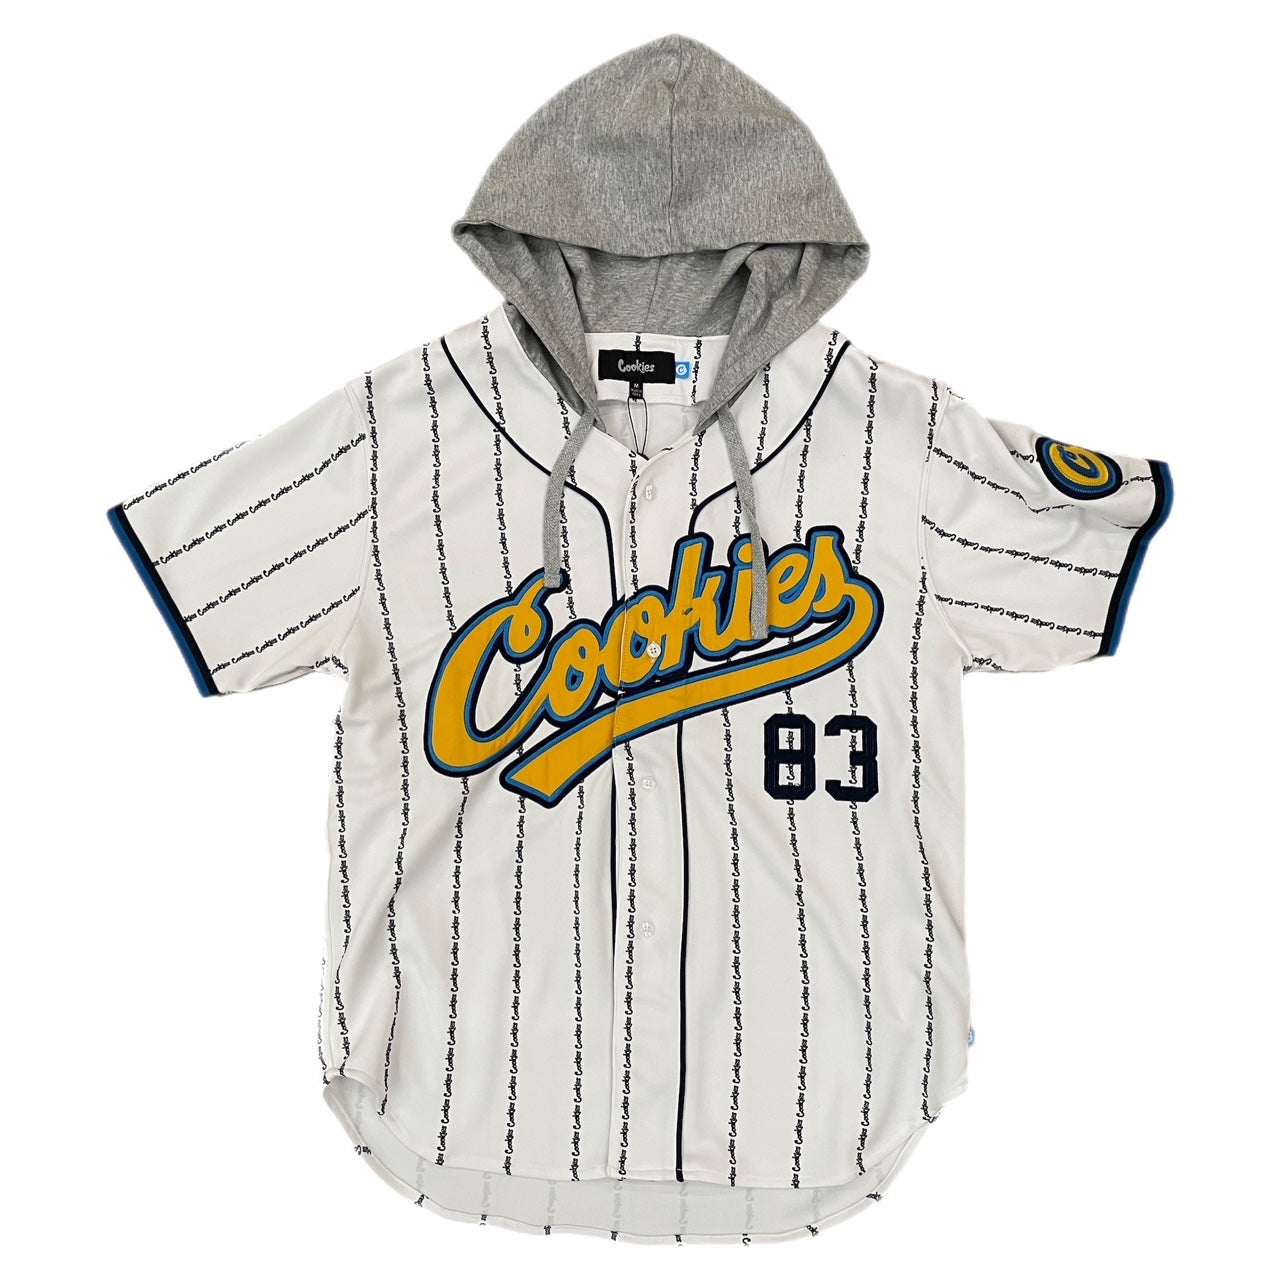 PUTTIN IN WORK POLY PERFORMANCE BLEND KNIT HOODED BASEBALL JERSEY W/ CUSTOM COOKIES PINSTRIPES, TRI-COLOR RIBBING & TACKLE TWILL LOGO APPLIQUÉ (WHITE)